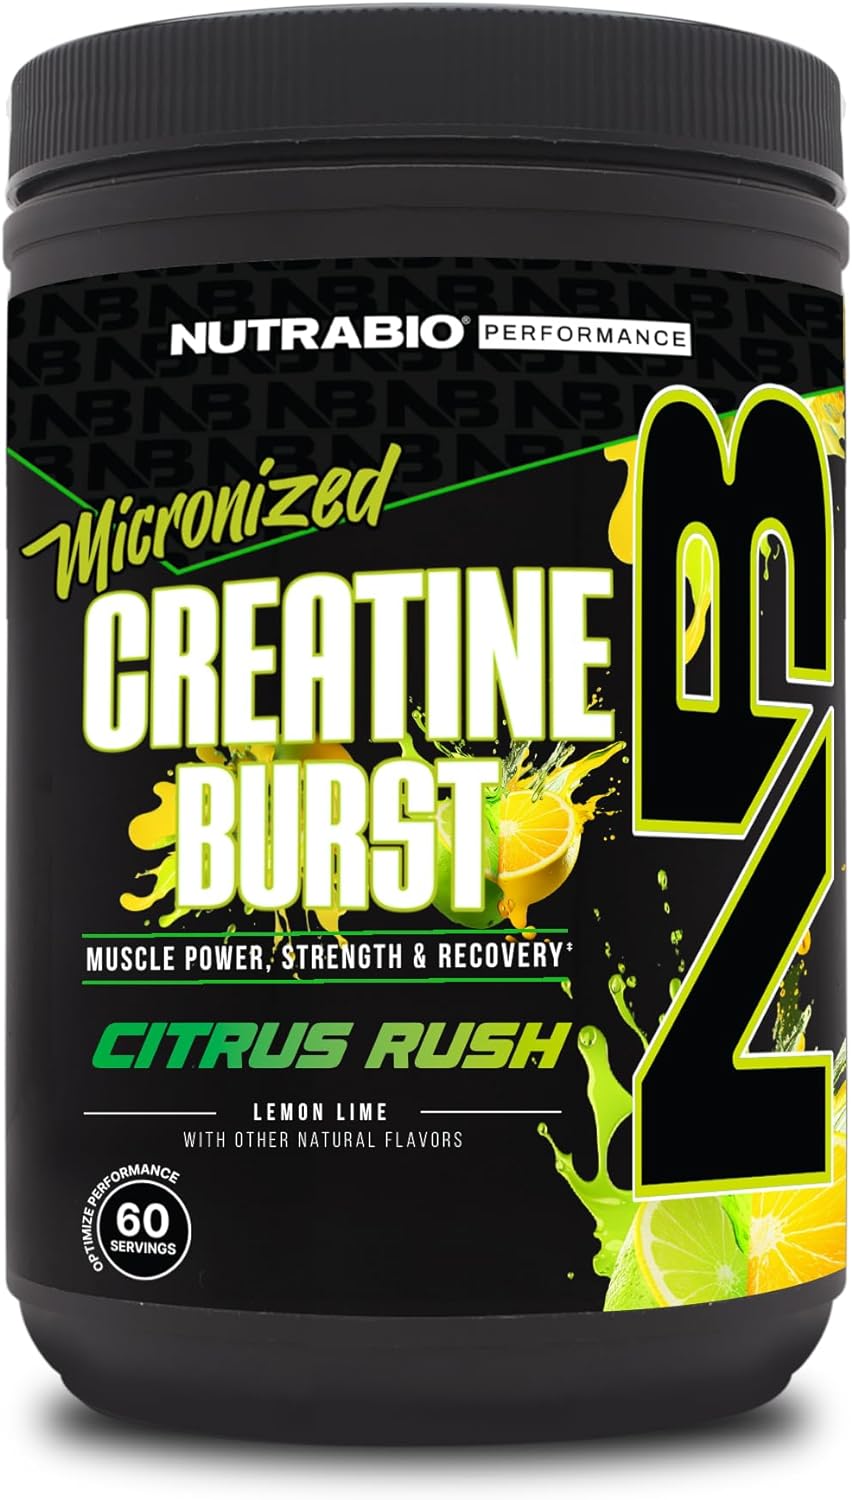 NutraBio Creatine Burst ? Micronized Creatine Monohydrate Powder ? 300 G ? Muscle Growth, Reduce Soreness ? Faster Recovery Time ? 60 Servings Citrus Rush